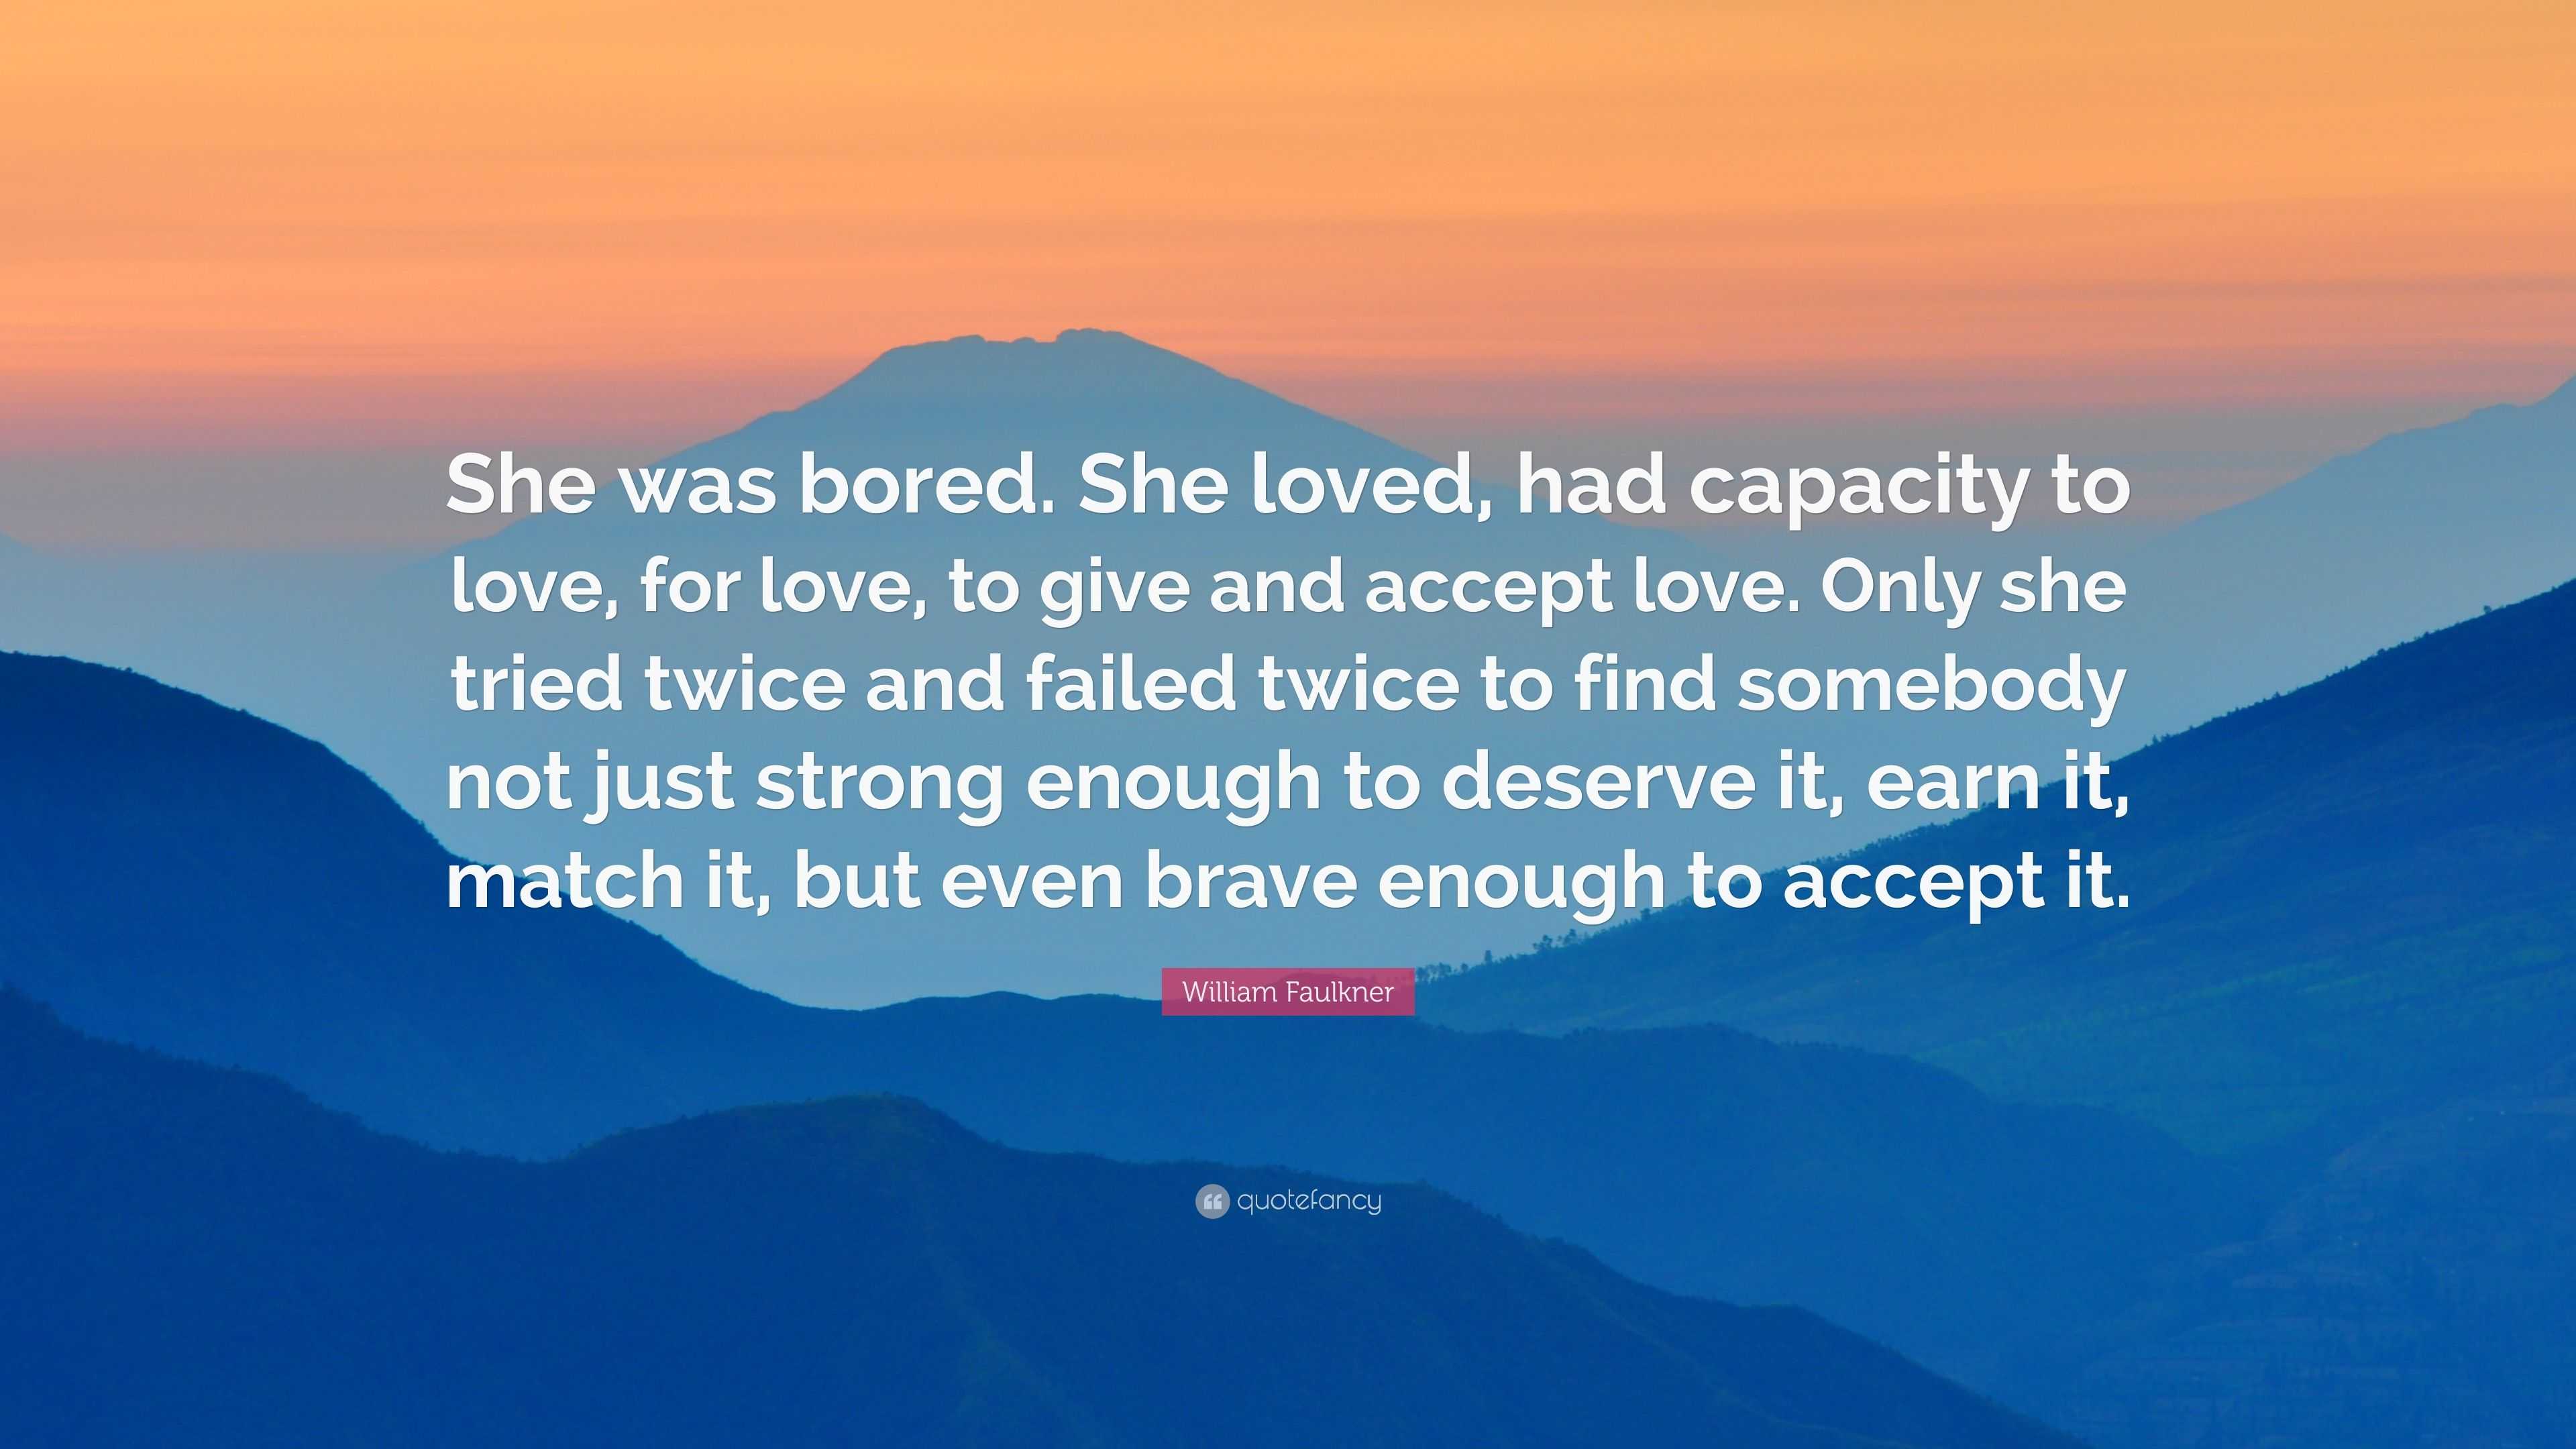 William Faulkner Quote She Was Bored She Loved Had Capacity To Love For Love To Give And Accept Love Only She Tried Twice And Failed Twice 7 Wallpapers Quotefancy